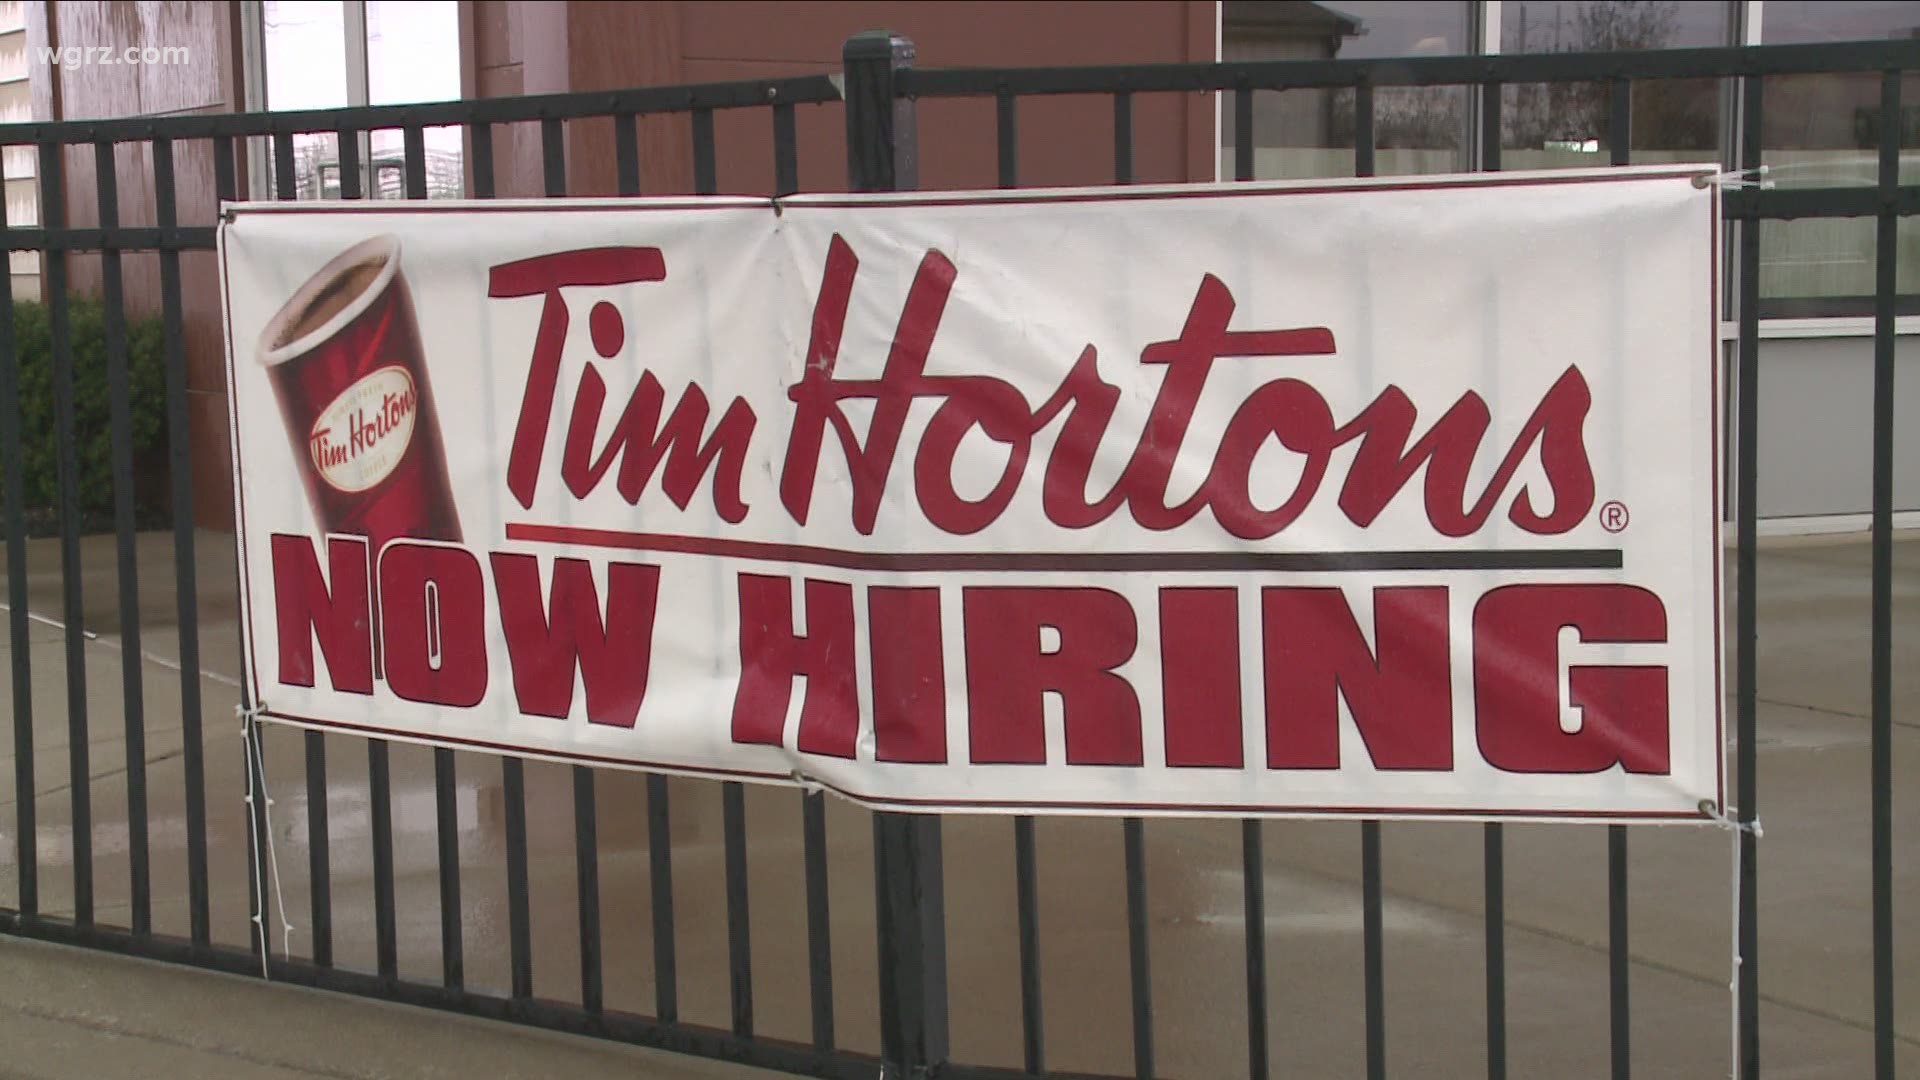 We've been seeing reports nationally and right here in WNY about what's being called a restaurant worker shortage. But the reason may not be so simple.